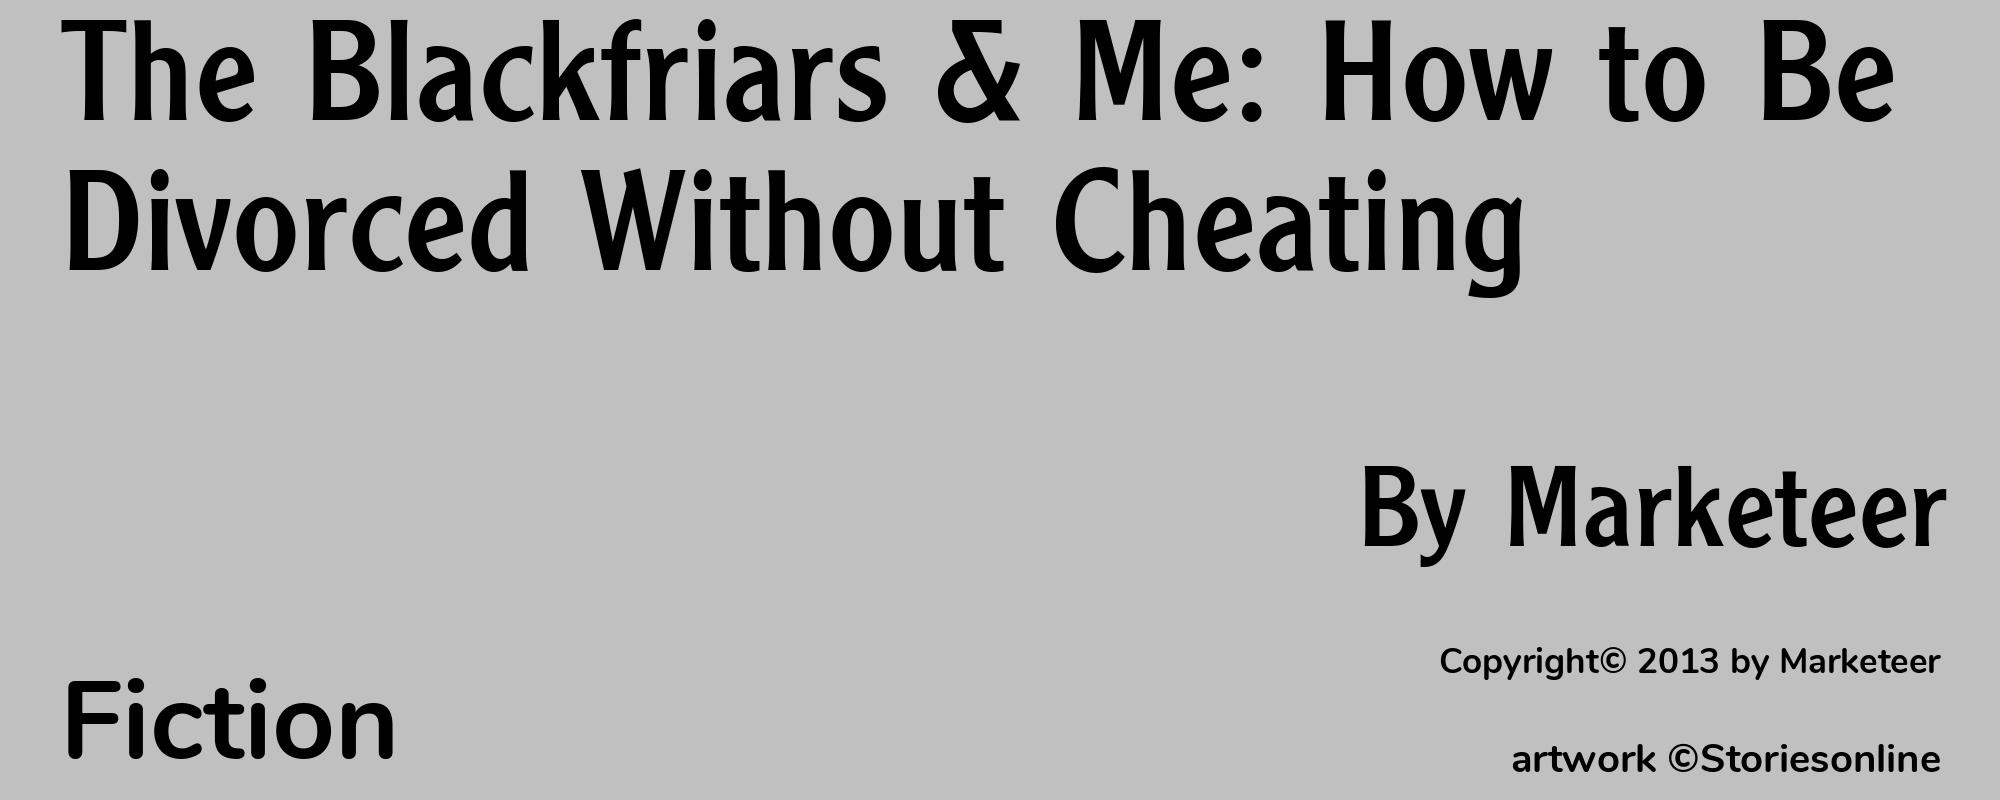 The Blackfriars & Me: How to Be Divorced Without Cheating - Cover